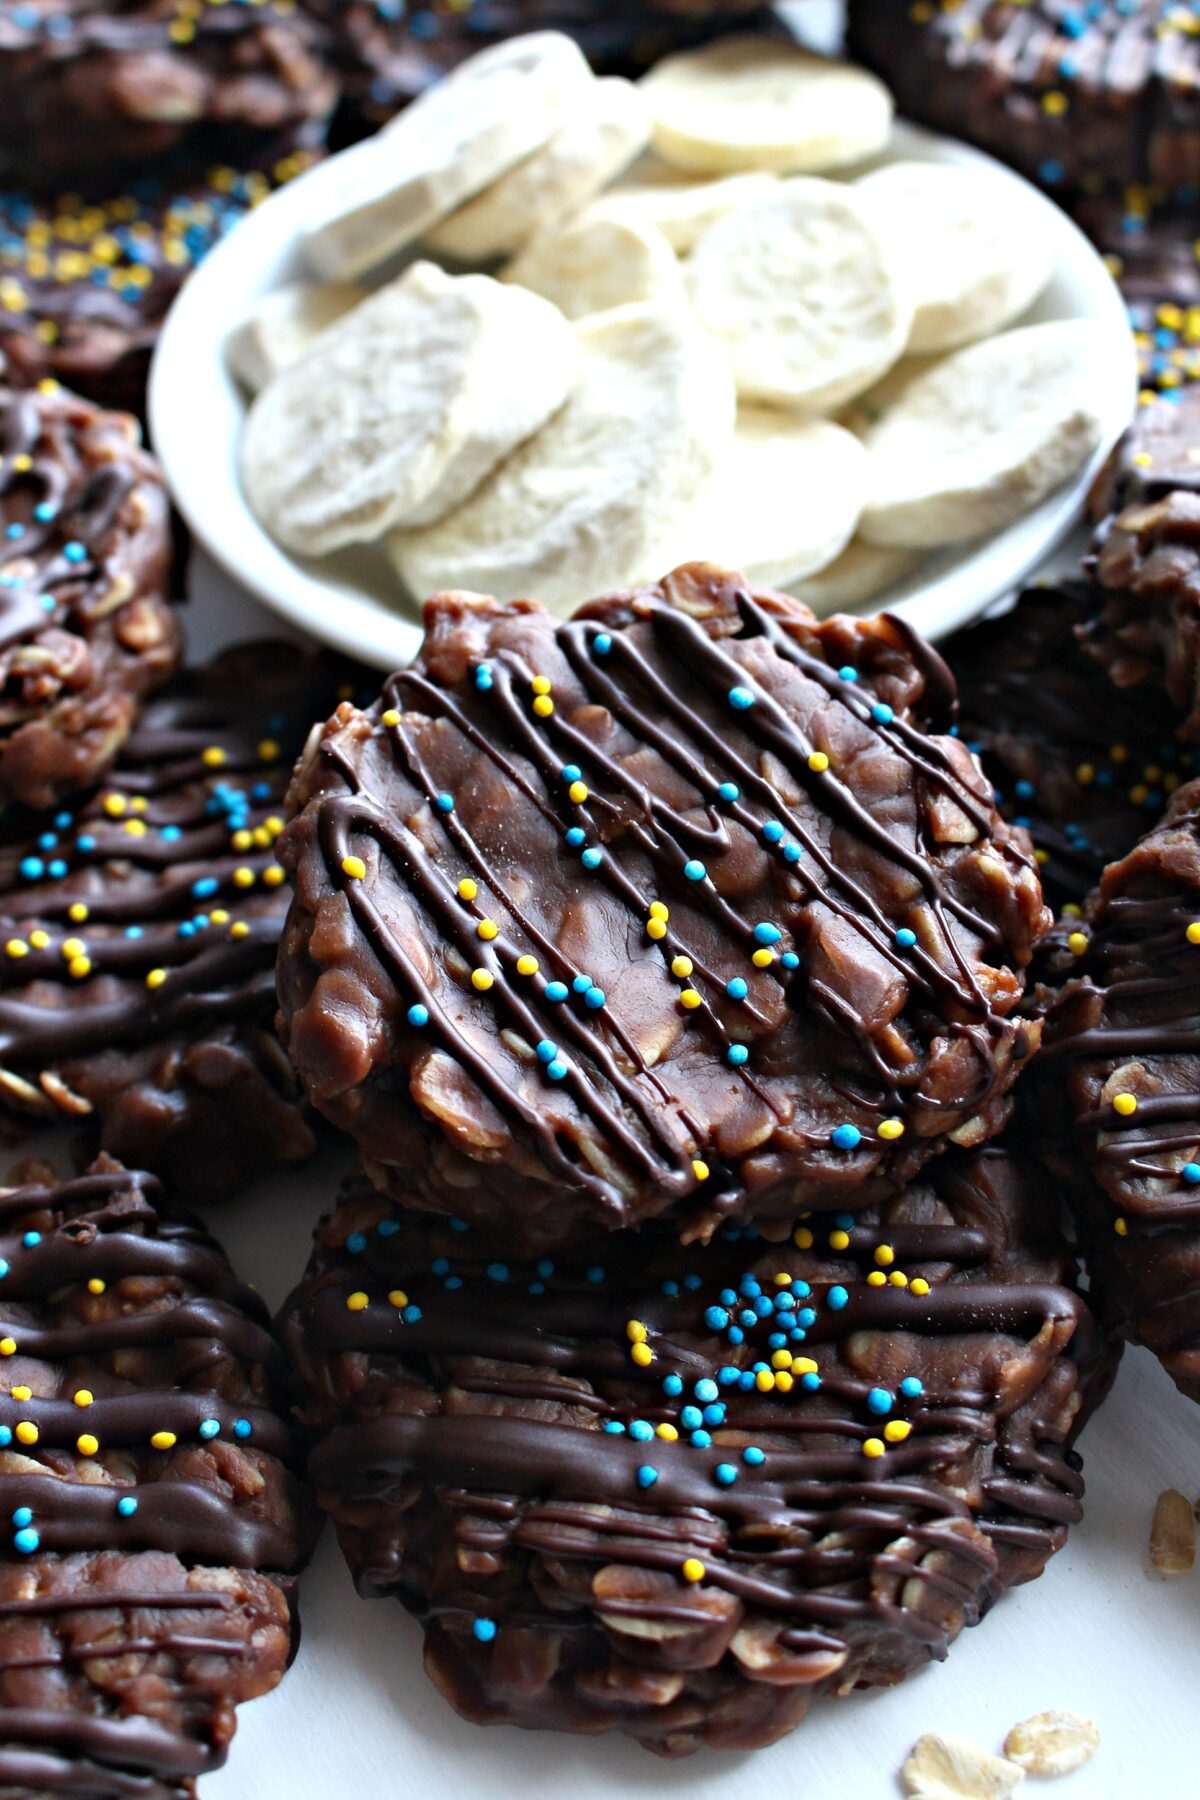 No-Bake Chocolate Peanut Butter Banana Cookies, thick discs of chocolate and oats, drizzled with chocolate and sprinkled with yellow and blue nonpareils.